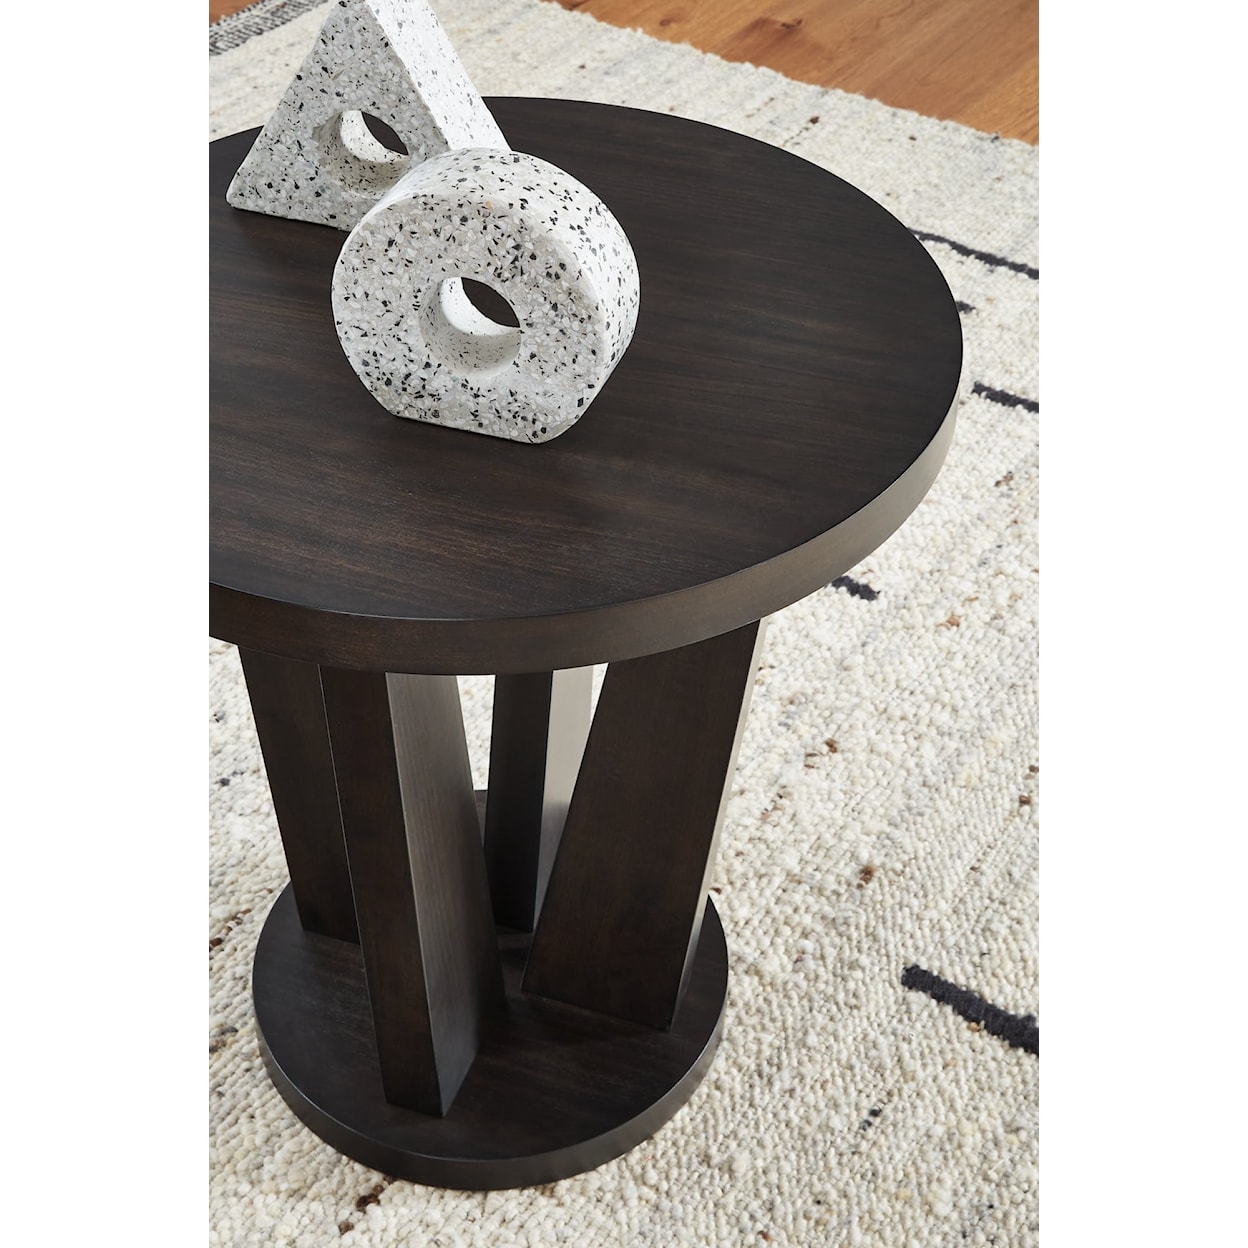 Signature Design by Ashley Chasinfield Round End Table